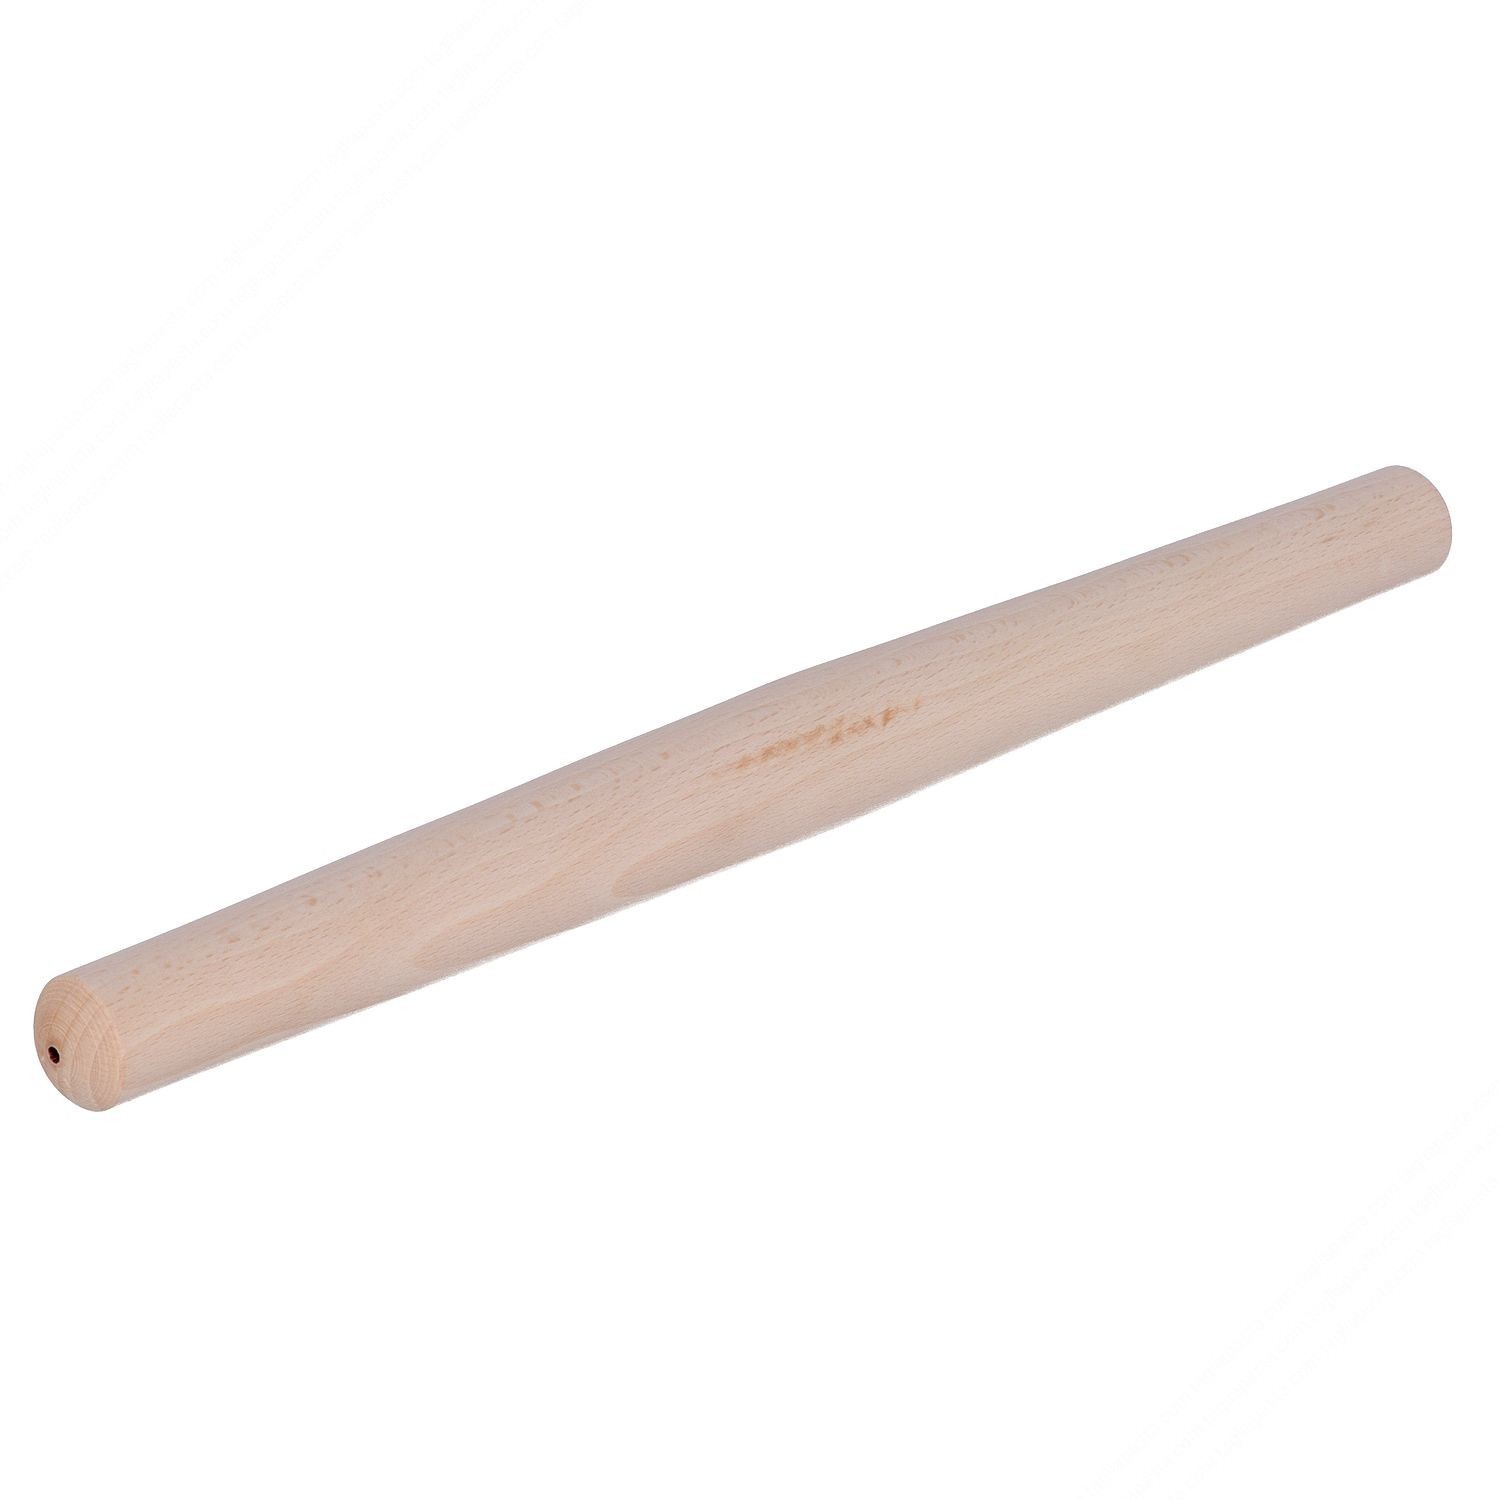 Cutter rolling pin in beech wood for spaghetti - length cm 32